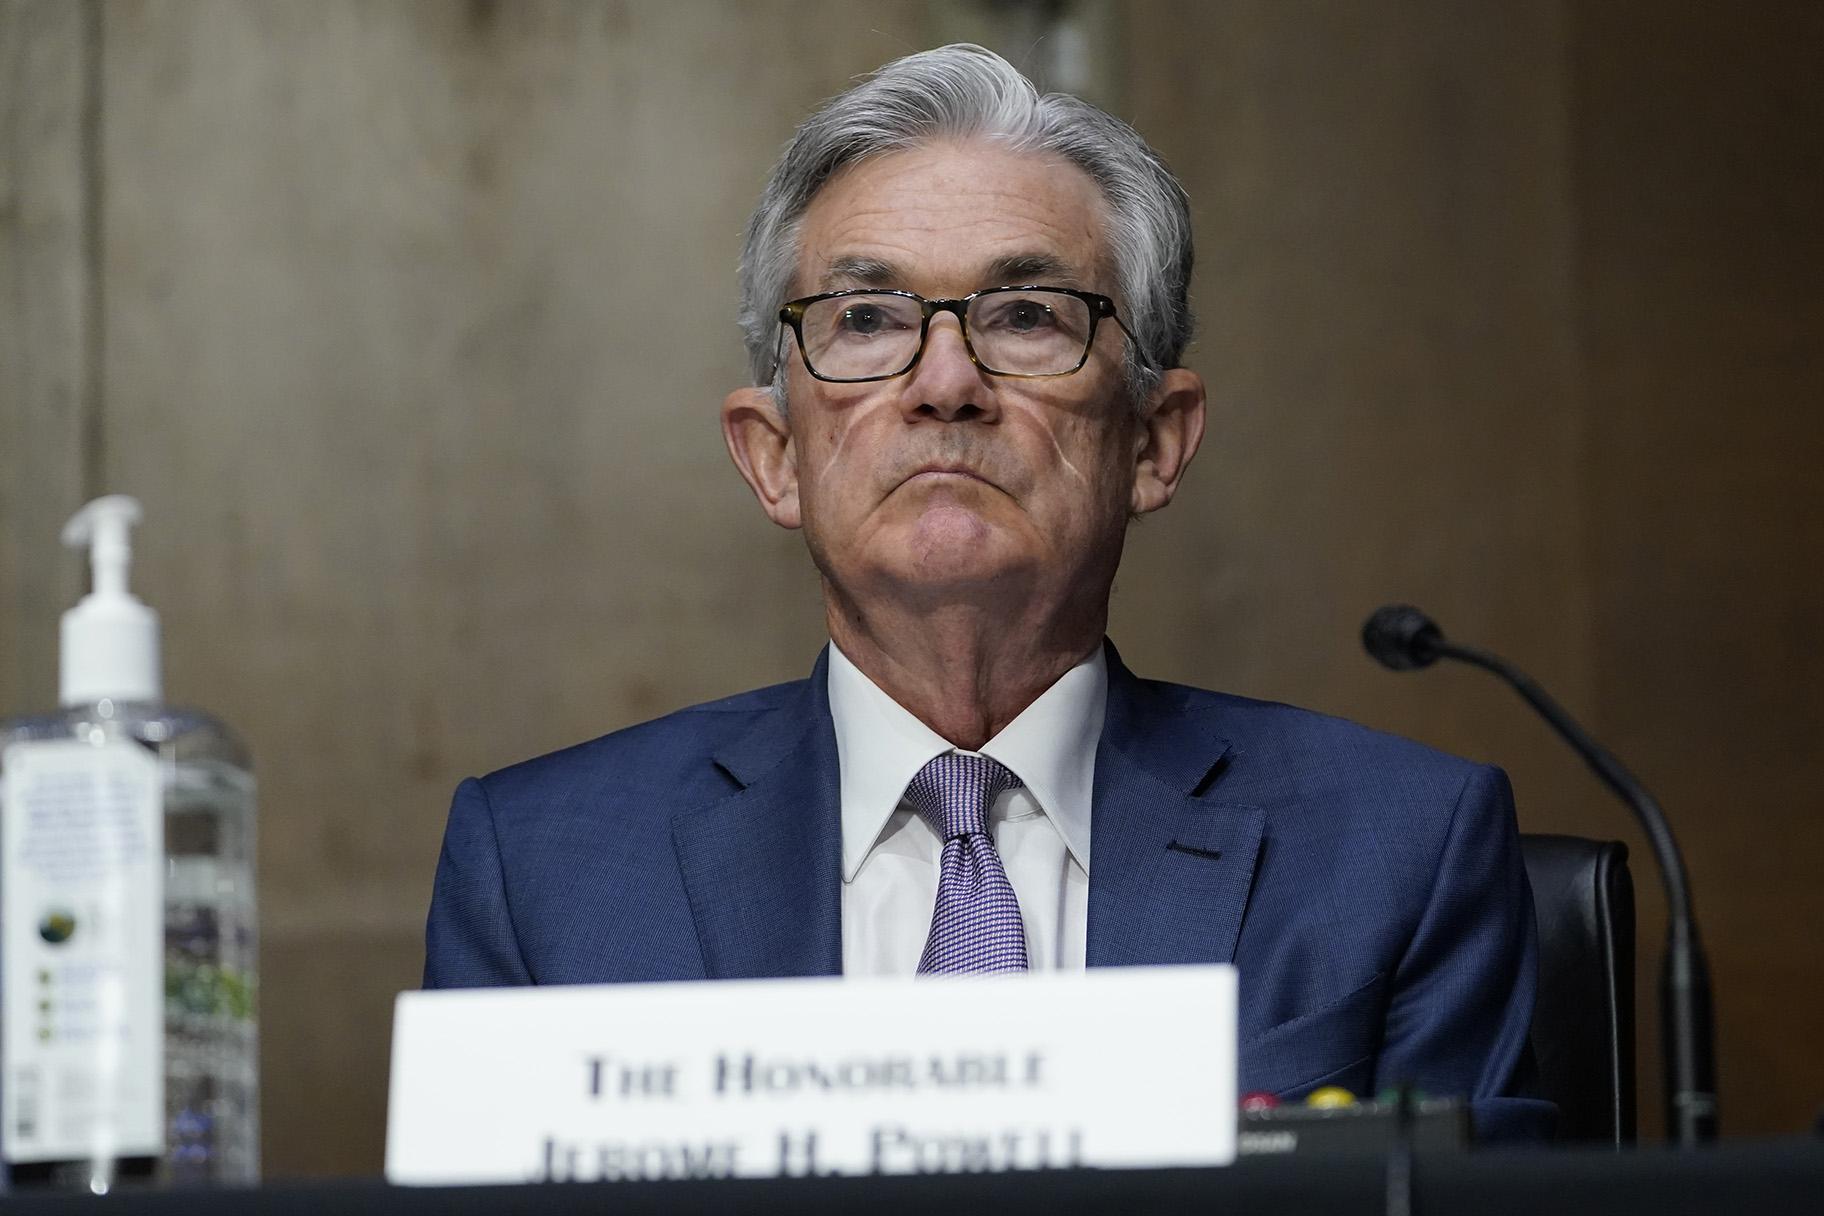 In this Dec. 1, 2020 file photo, Chairman of the Federal Reserve Jerome Powell appears before the Senate Banking Committee on Capitol Hill in Washington. (AP Photo / Susan Walsh, Pool, File)